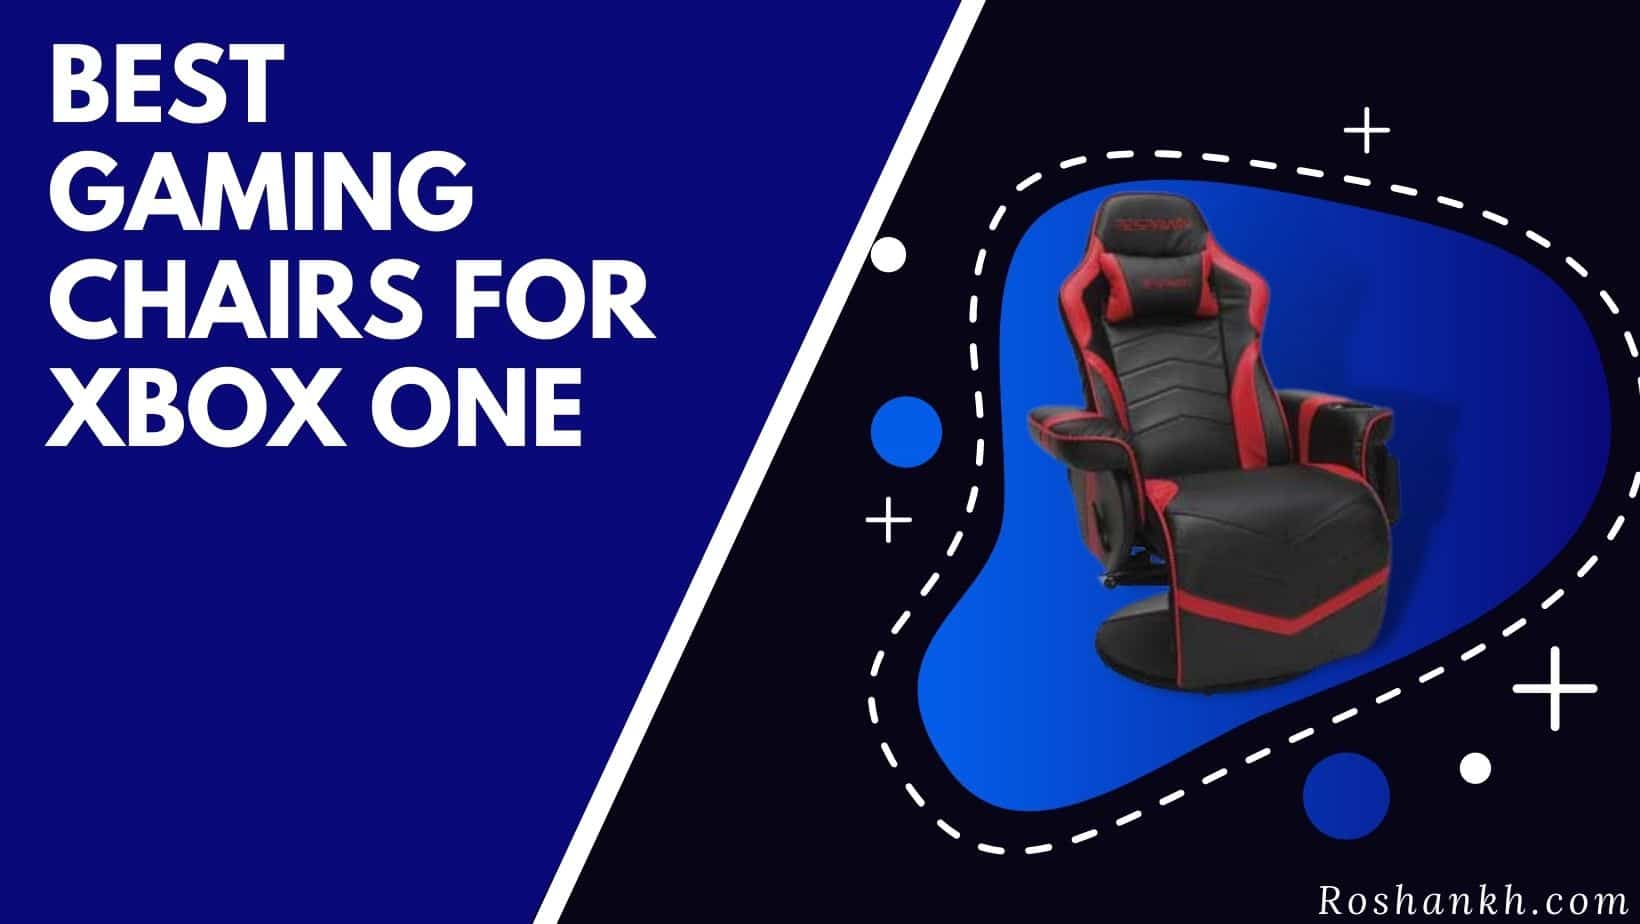 Best Gaming Chairs for Xbox One